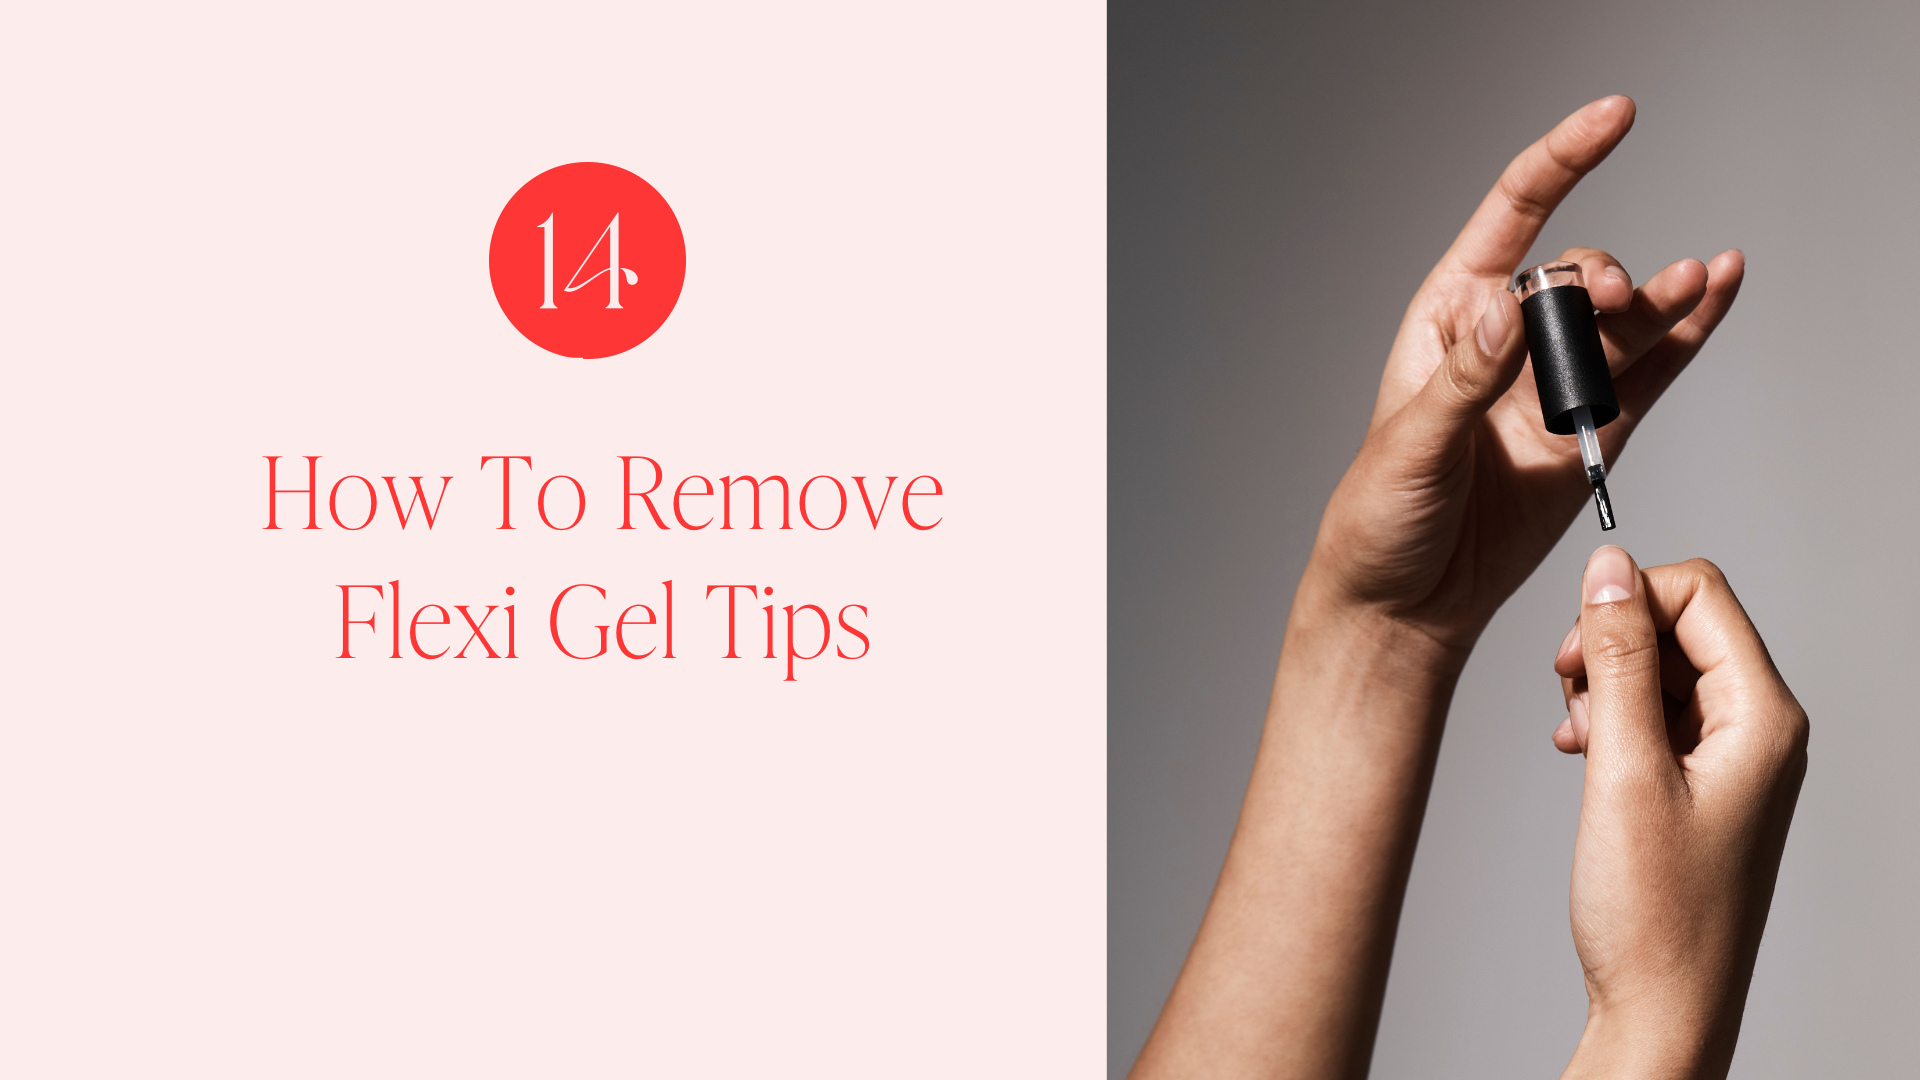 Load video: HOW TO REMOVE FLEXI GEL TIPS